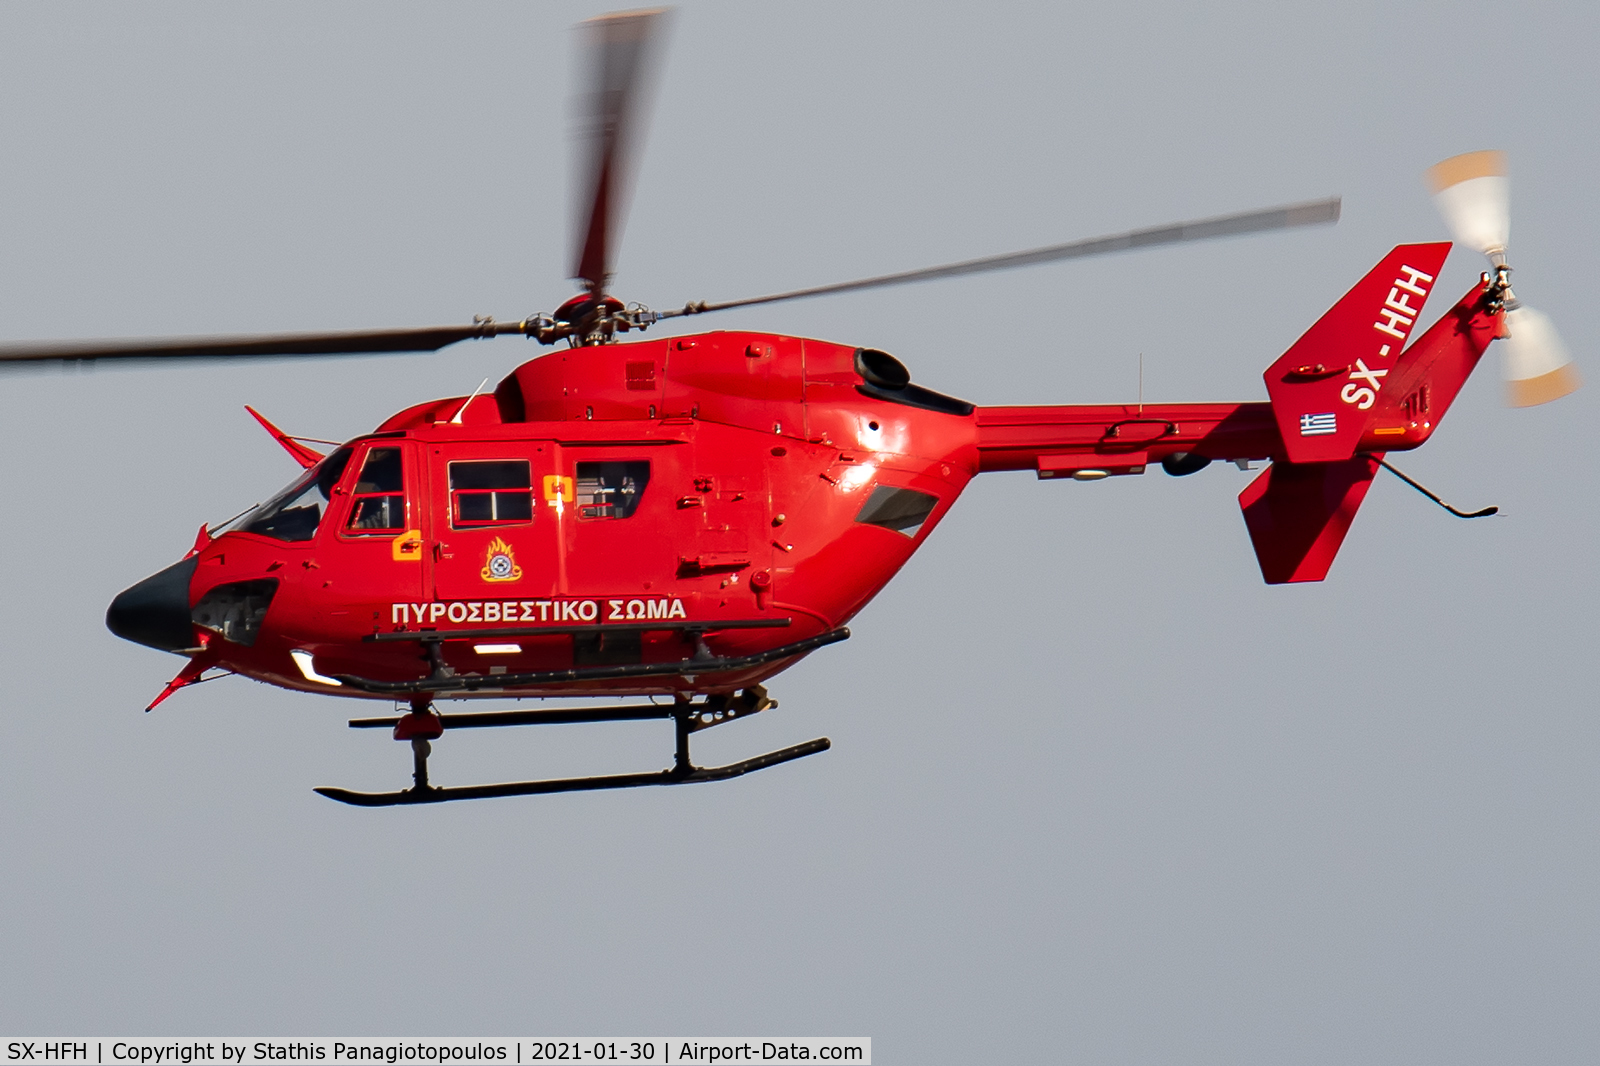 SX-HFH, Eurocopter-Kawasaki Bk-117C-1 C/N 7549, Helicopter by Hellenic Fire Service